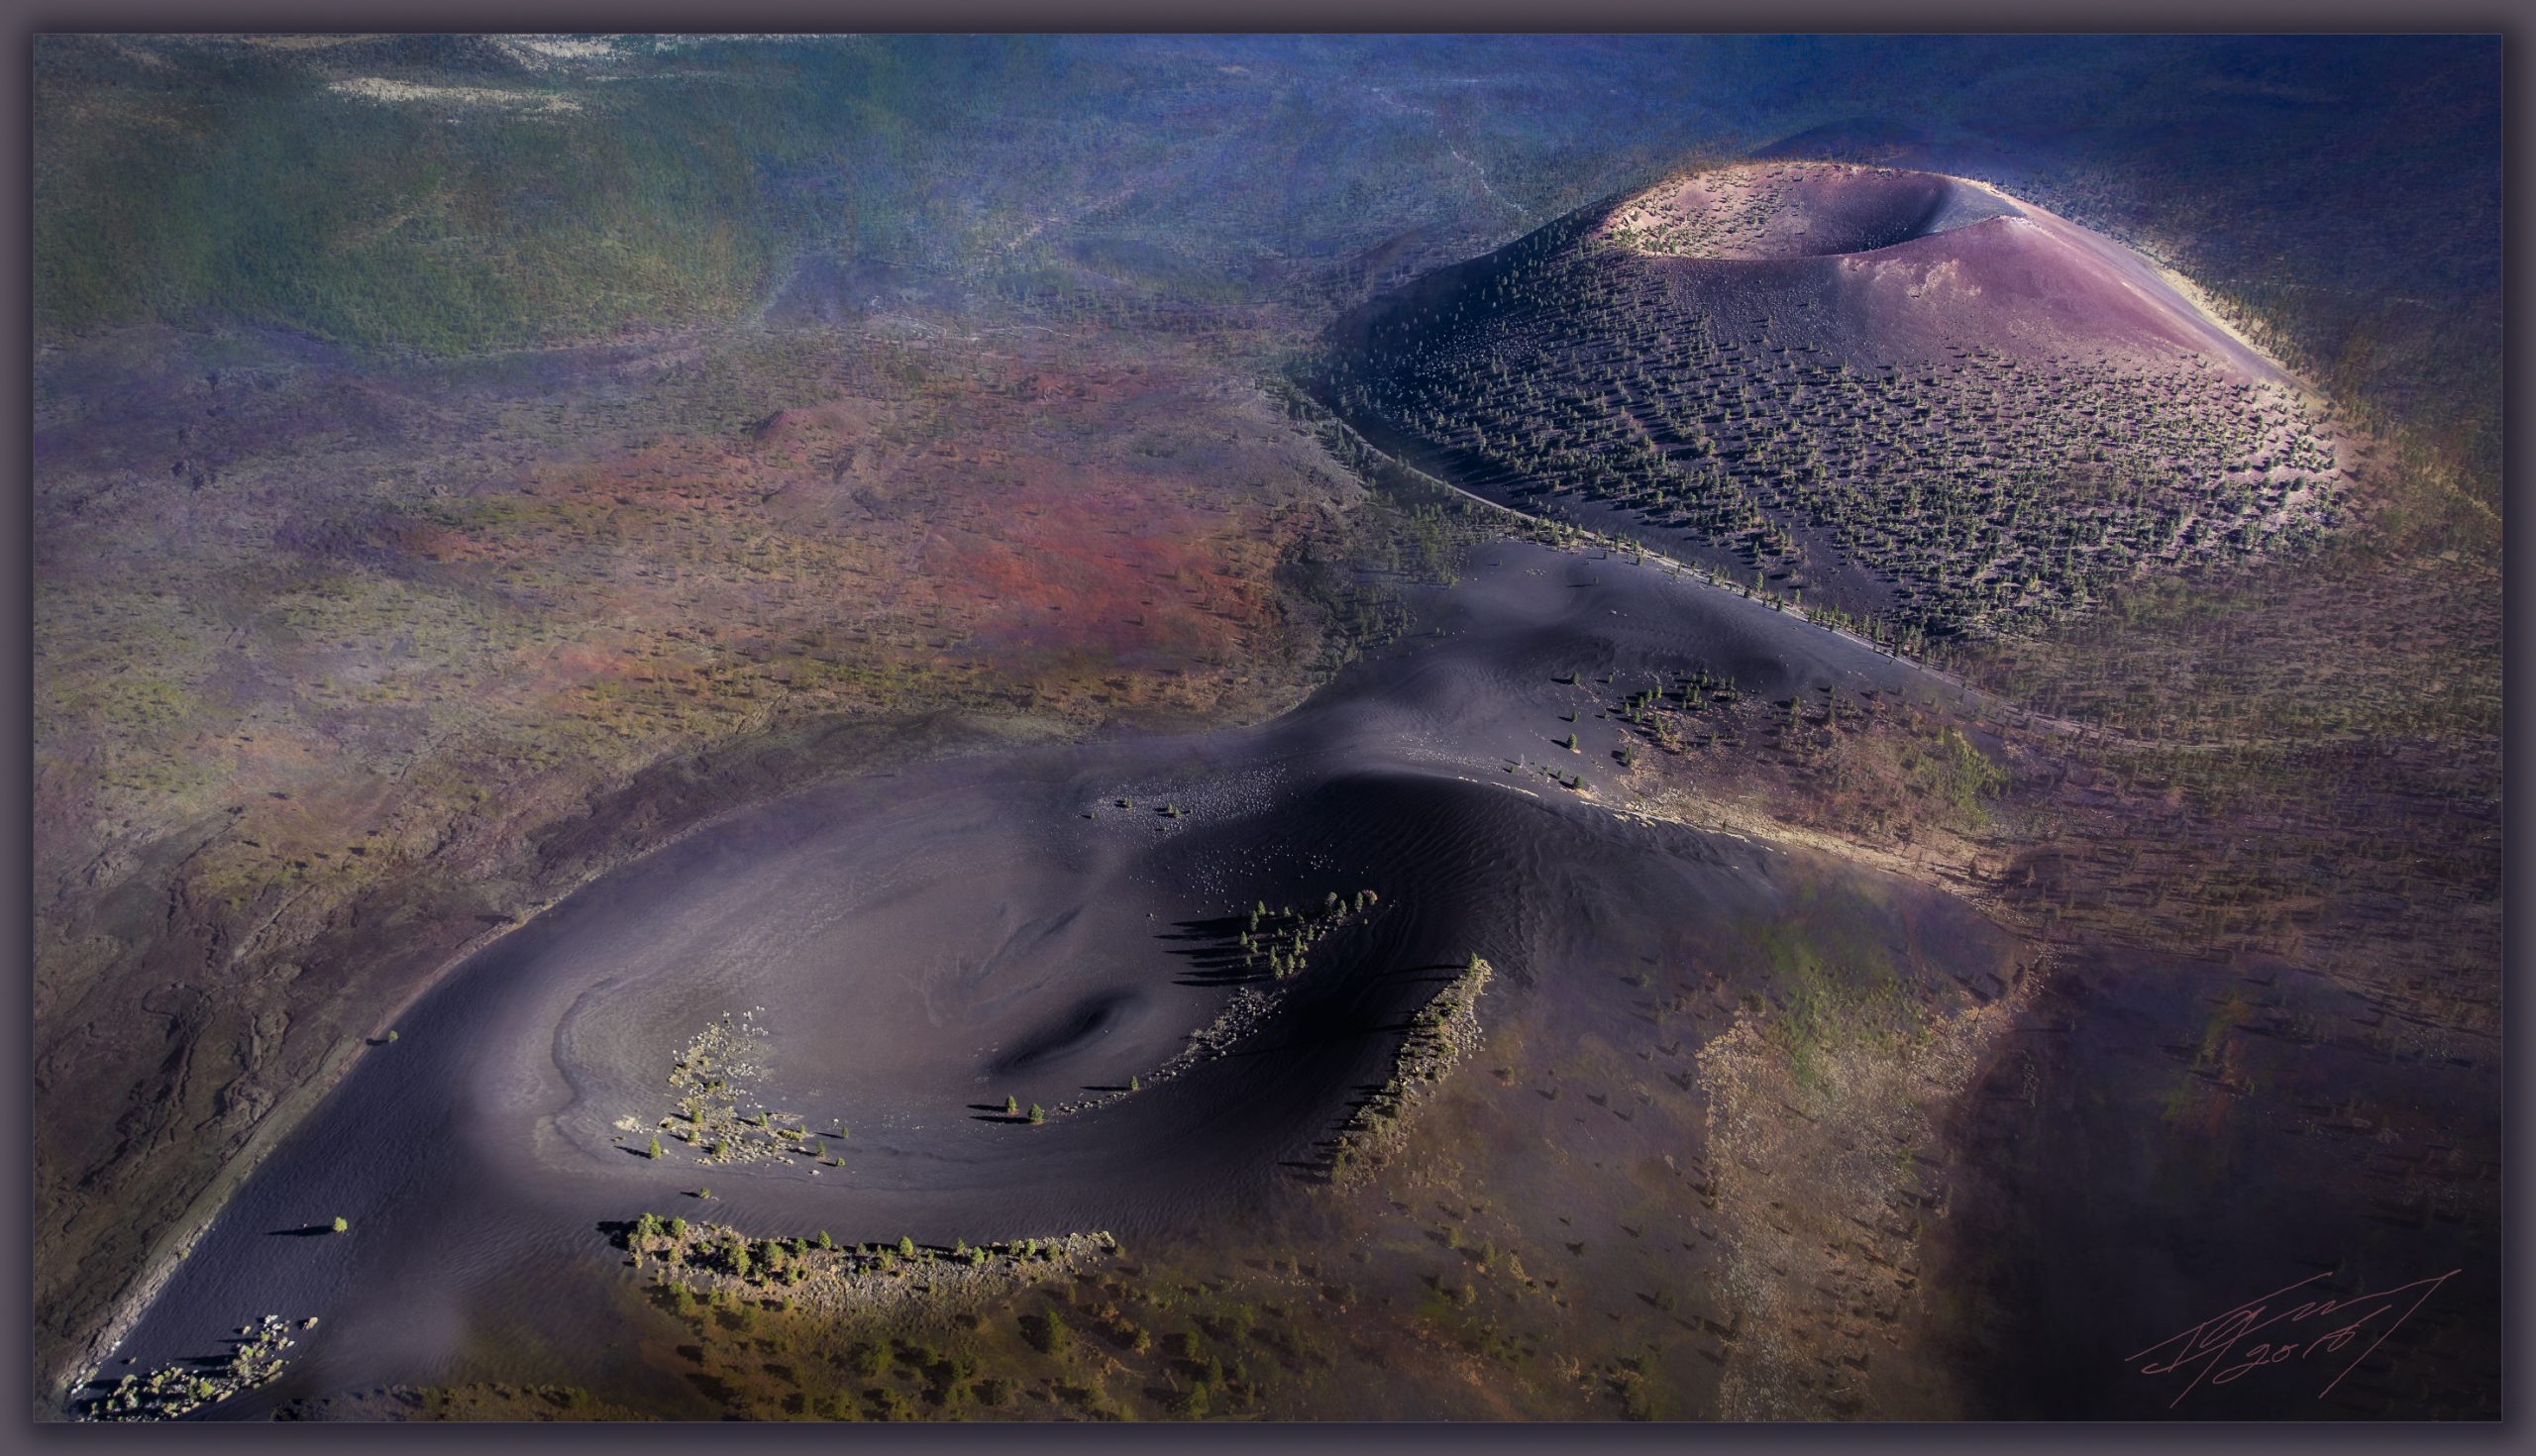 Two brightly colored cinder cone volcanoes (reds, grays, purples). Near the back is the larger Sunset Crater and toward the front of the image is an older unnamed cinder cone. Both are part of the San Francisco Volcanic Field of Northern Arizona.